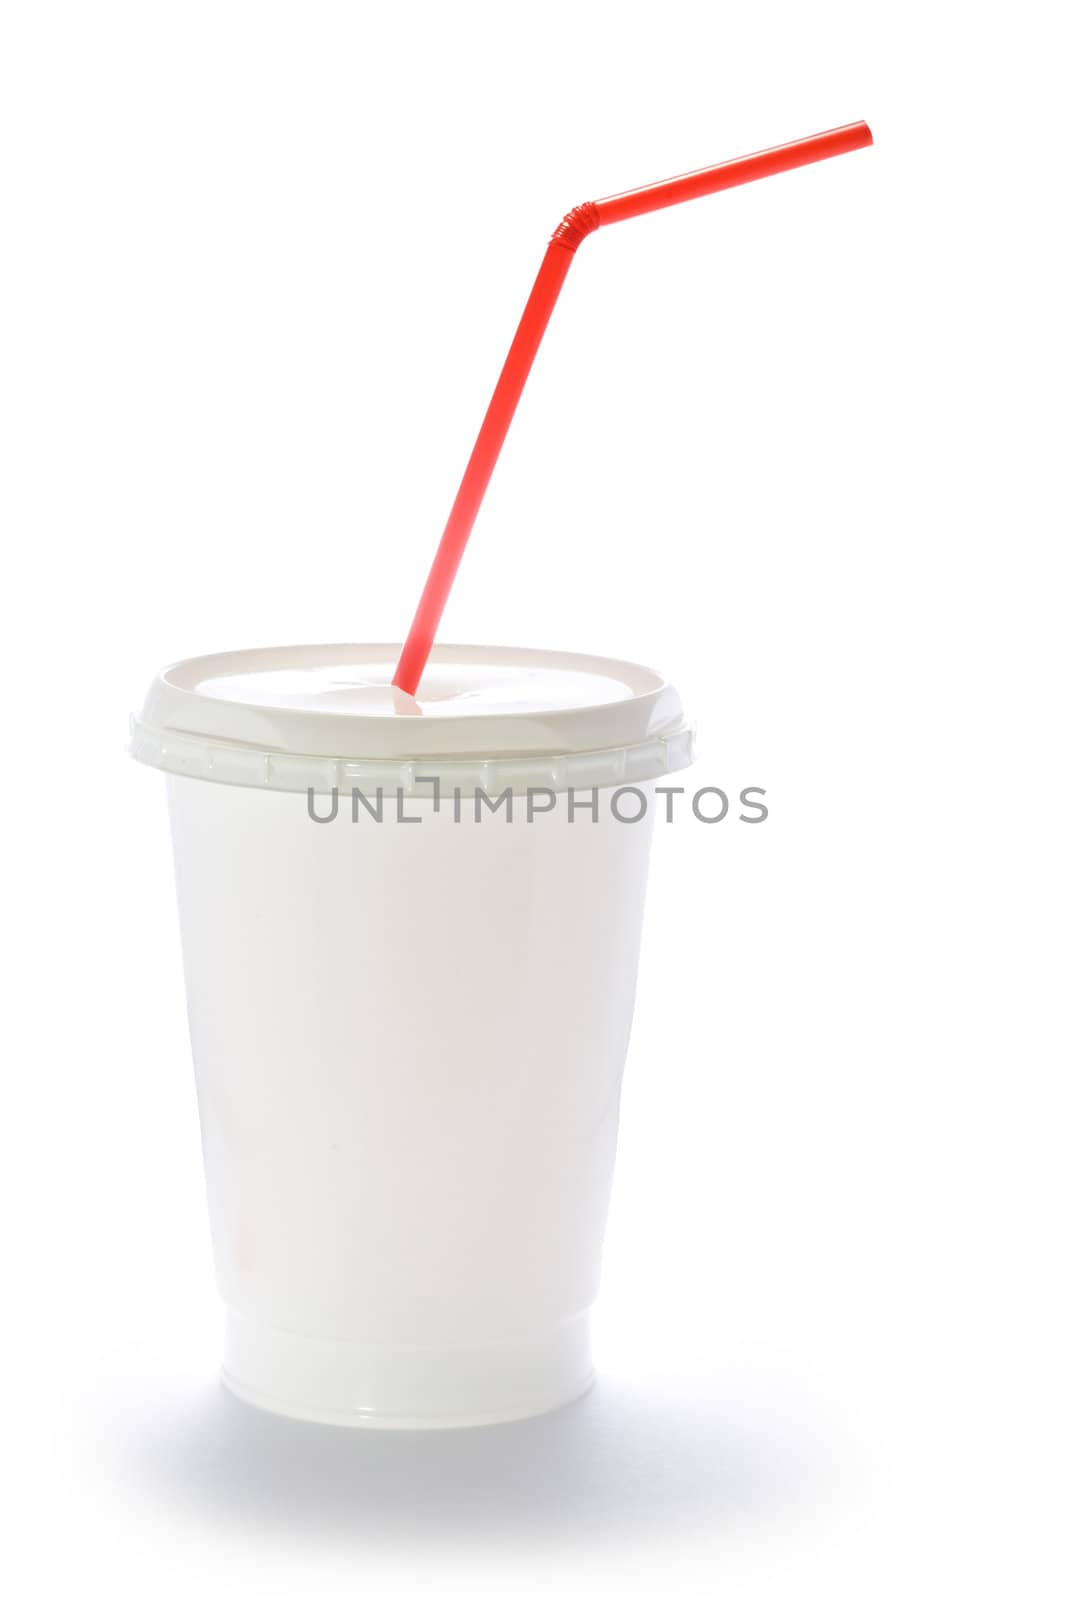 Stock photo: an image of a white plastic cup with a red straw